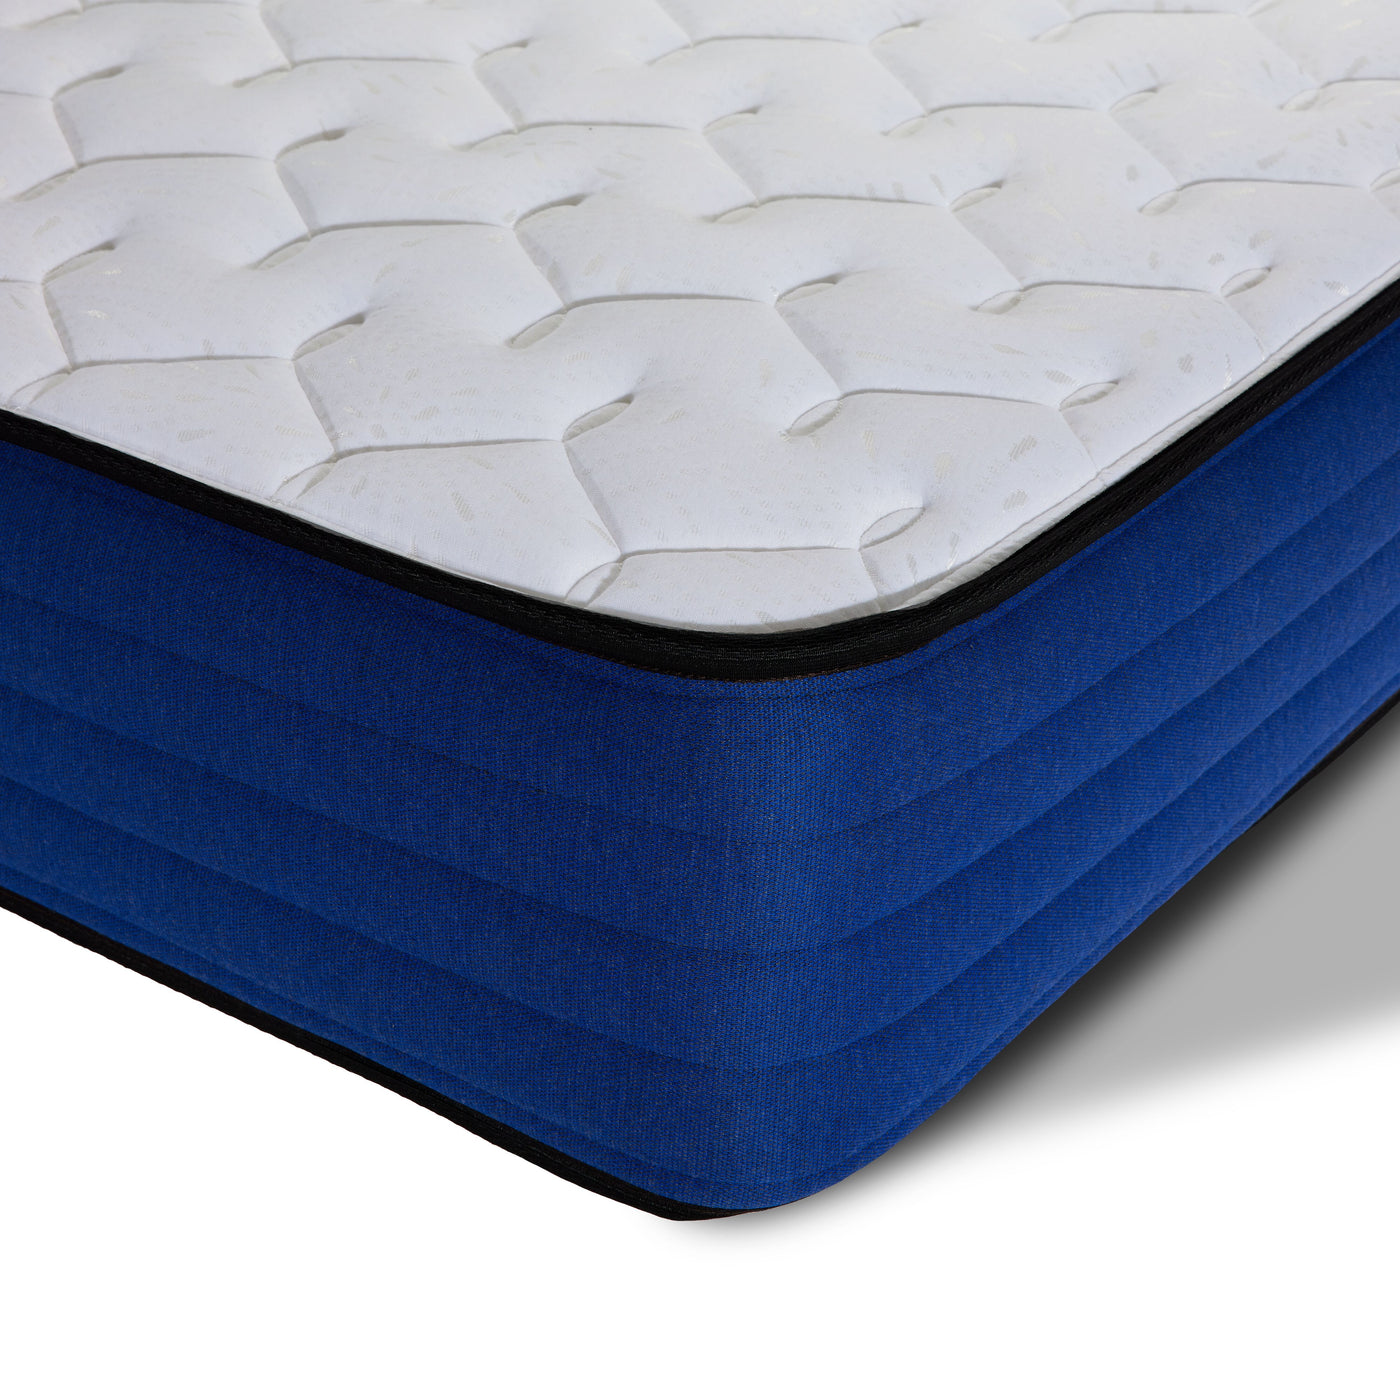 Shop Sealy Mattresses, Supportive & Comfortable, Free Shipping